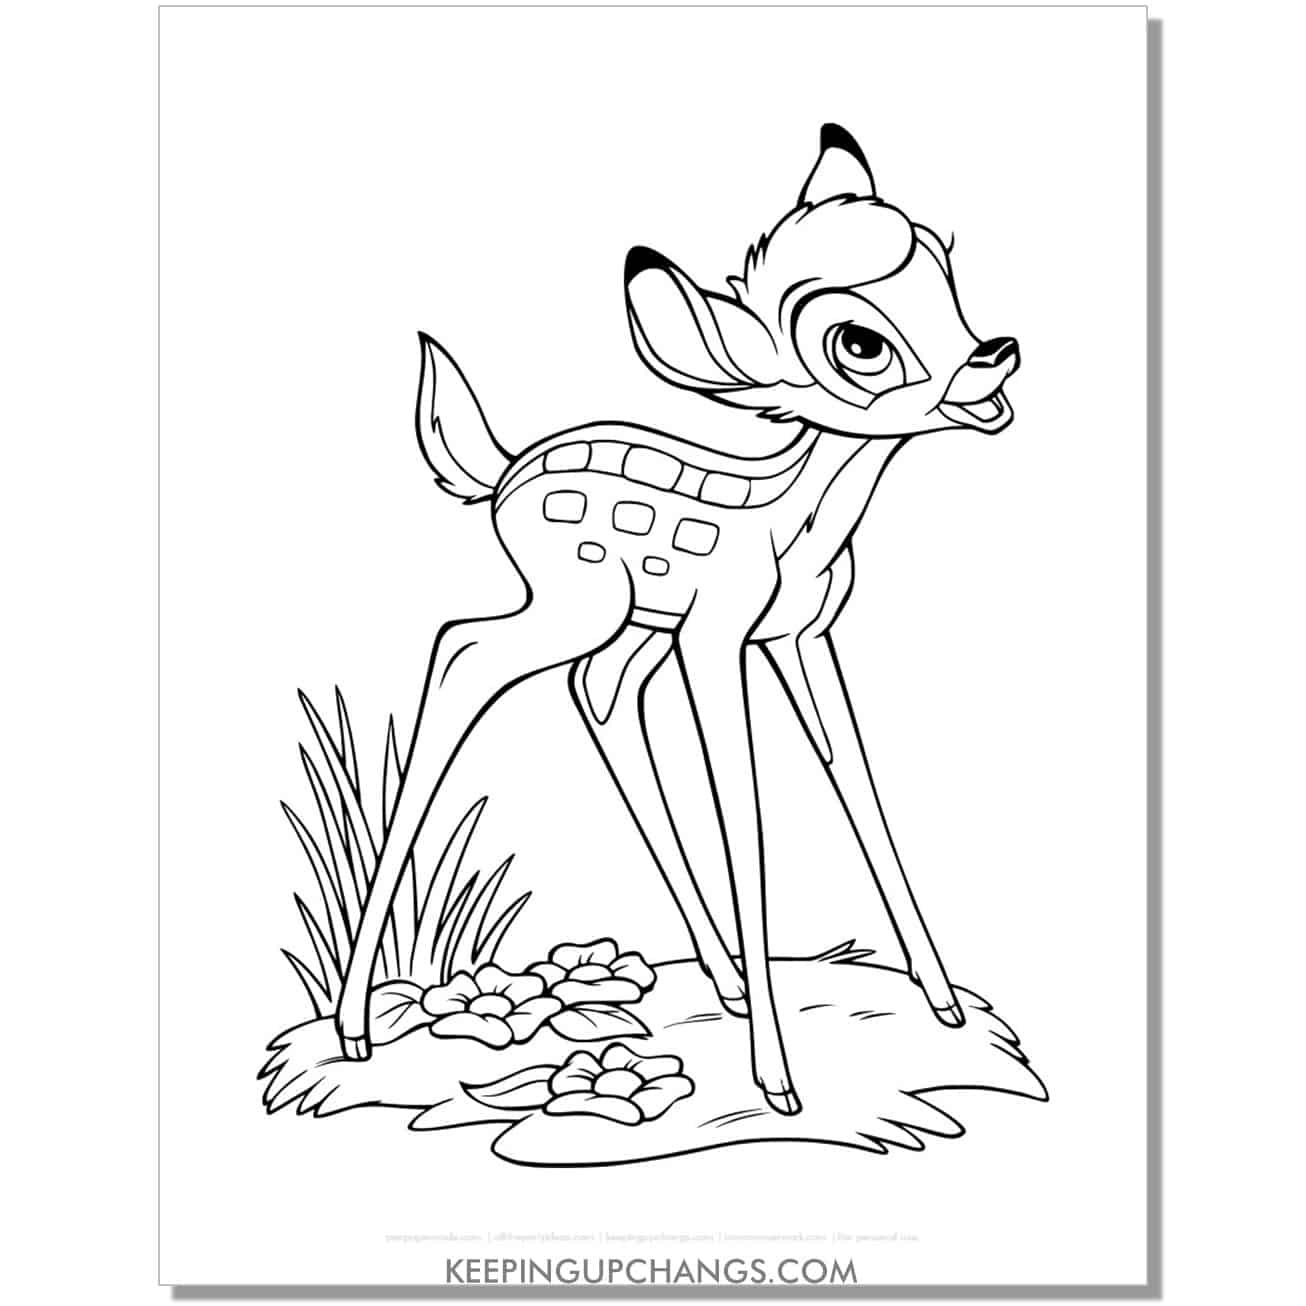 free bambi standing on 4 legs coloring page, sheet.